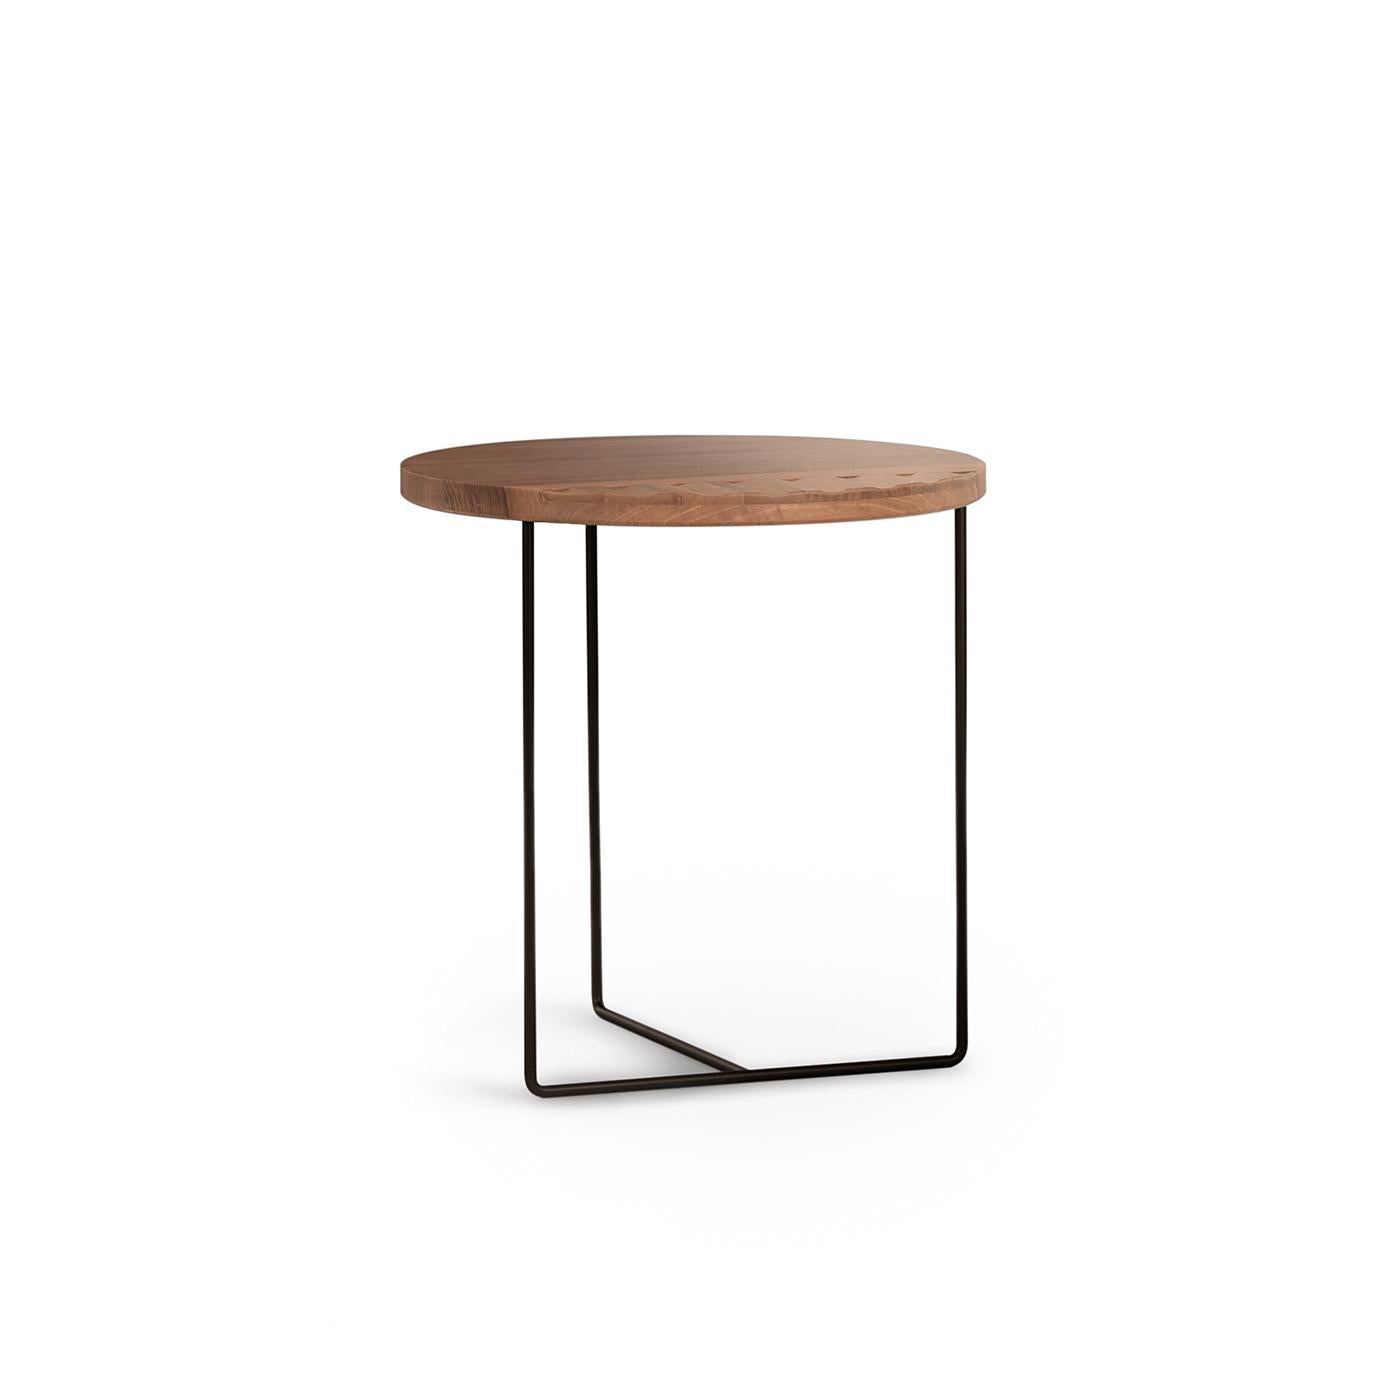 An exquisite work of craftsmanship by Davide Aquini, this side table is composed of a Minimalist three-leg structure made of reinforced steel finished with an iron black lacquer. The round top is made of solid walnut whose 1/3 of its surface boasts